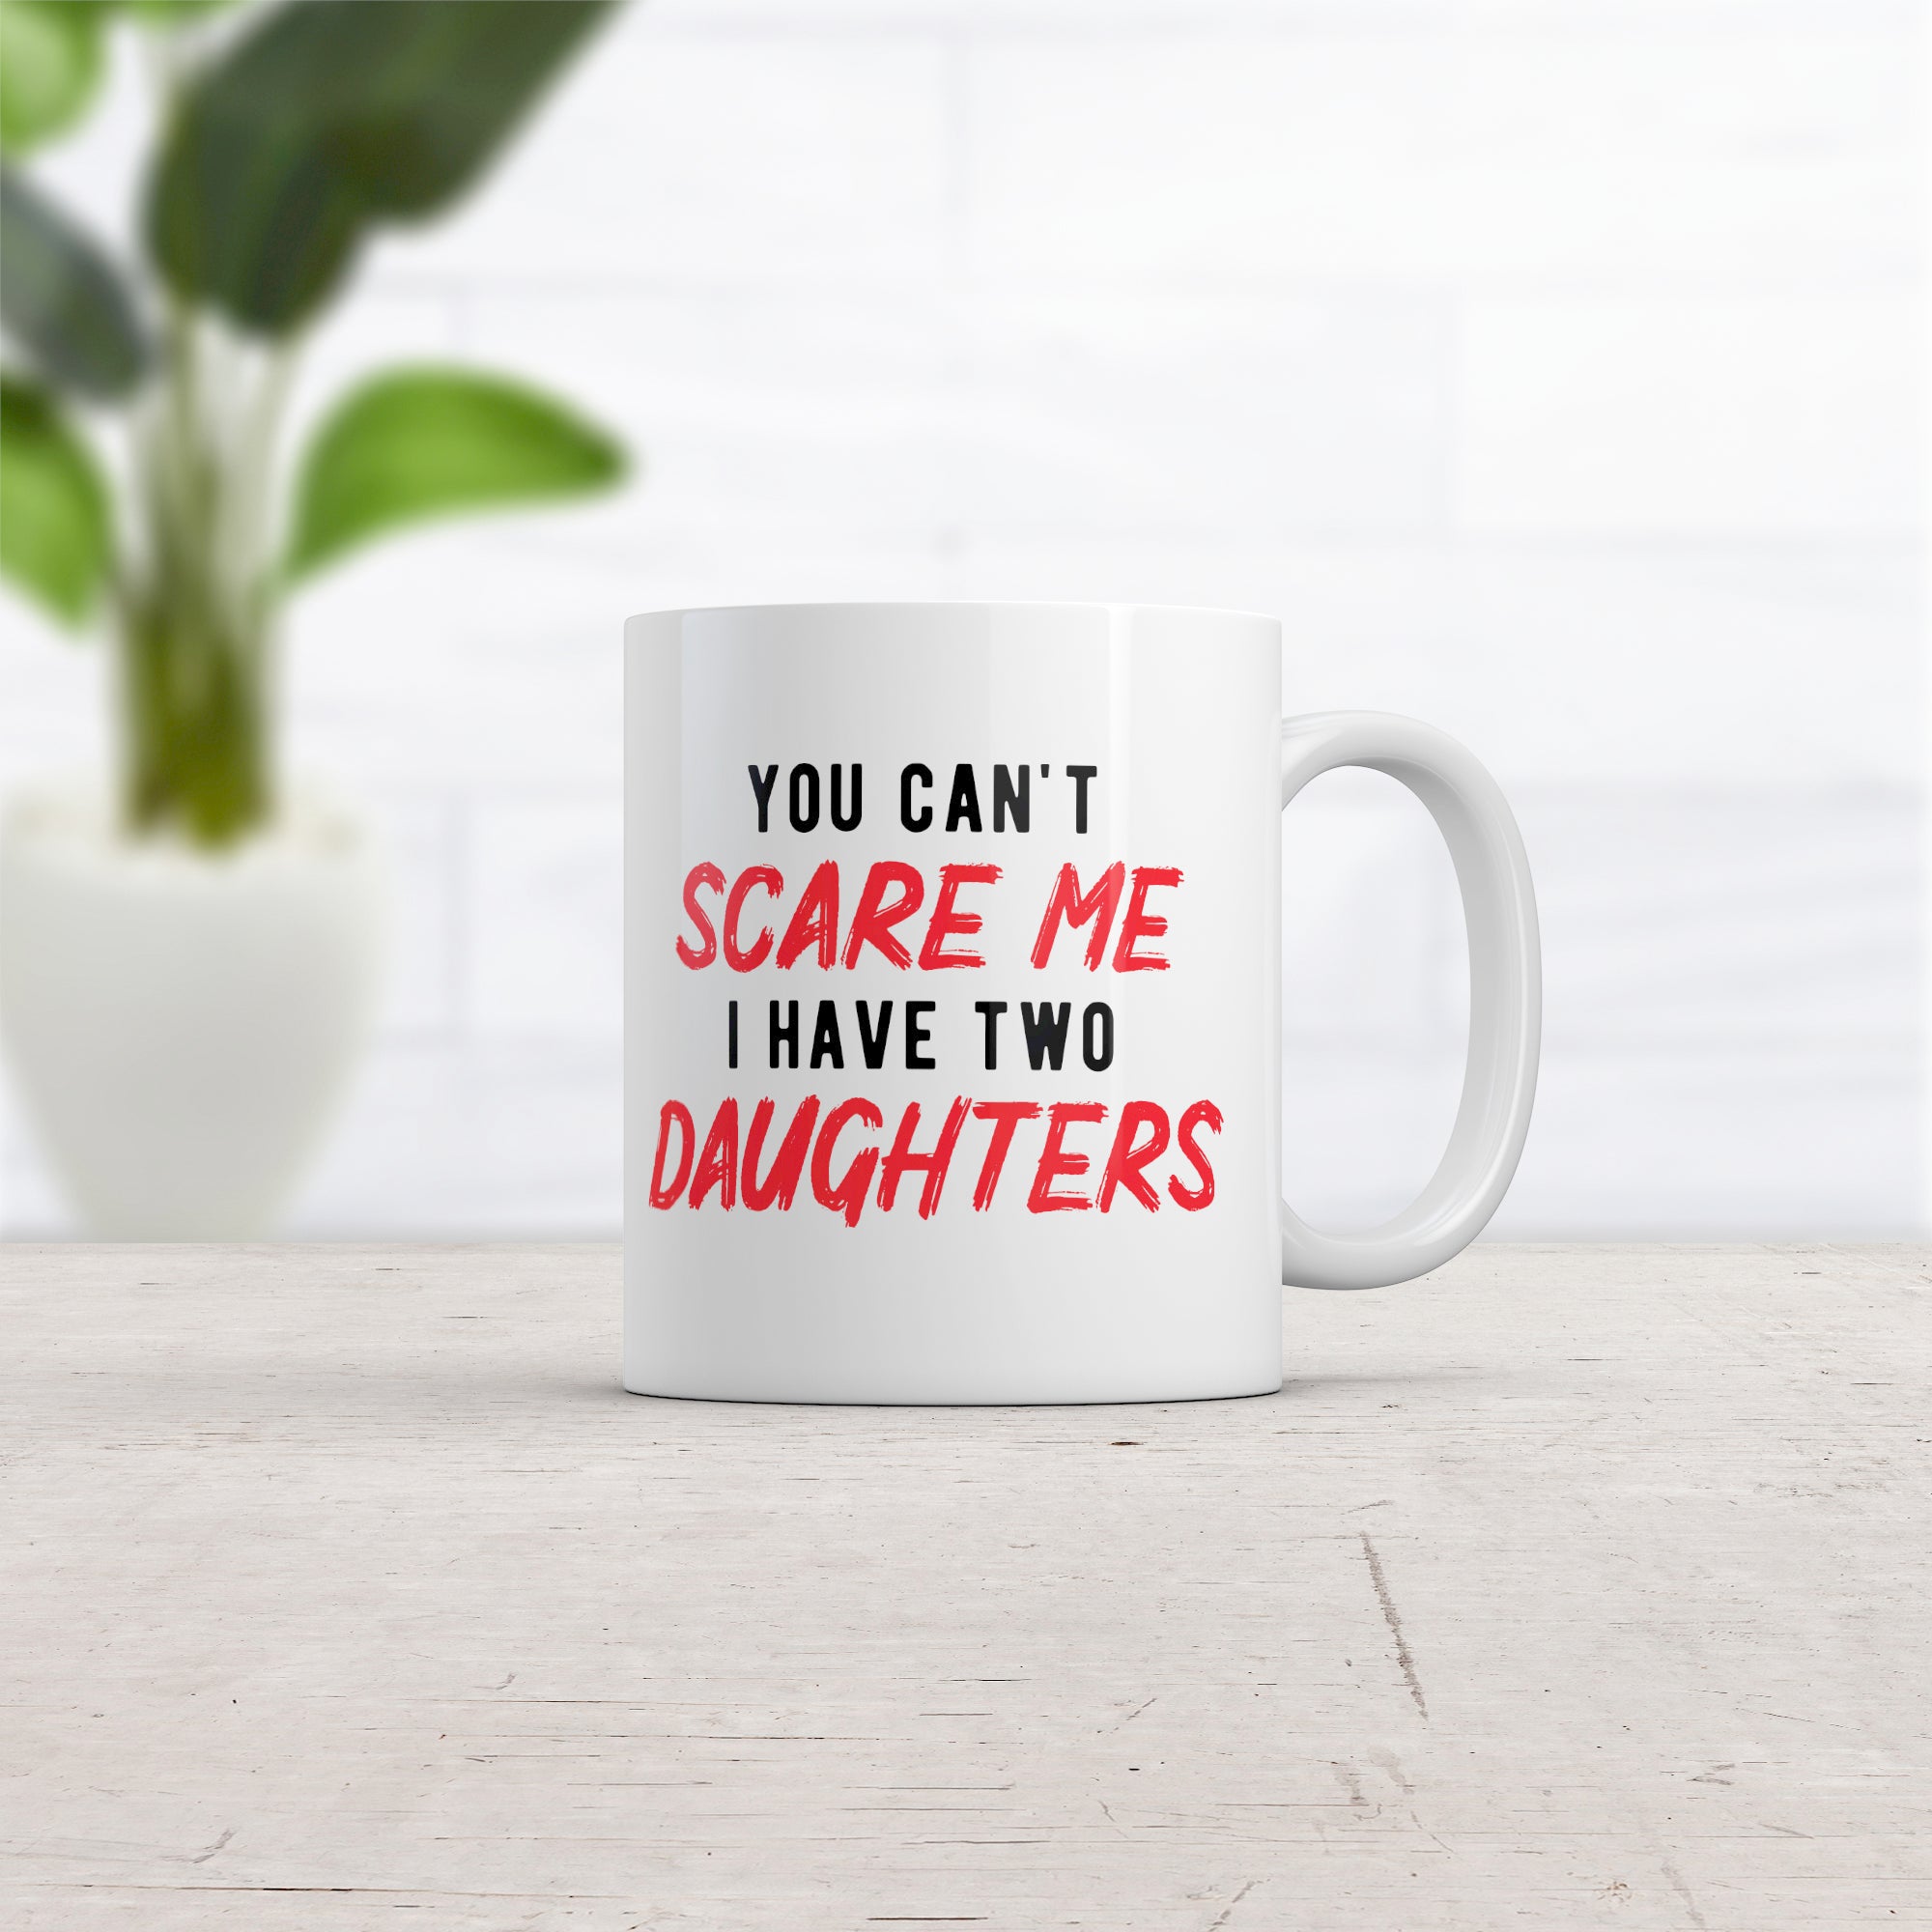 Funny White You Cant Scare Me I Have Two Daughters Coffee Mug Nerdy Sarcastic Daughter Tee